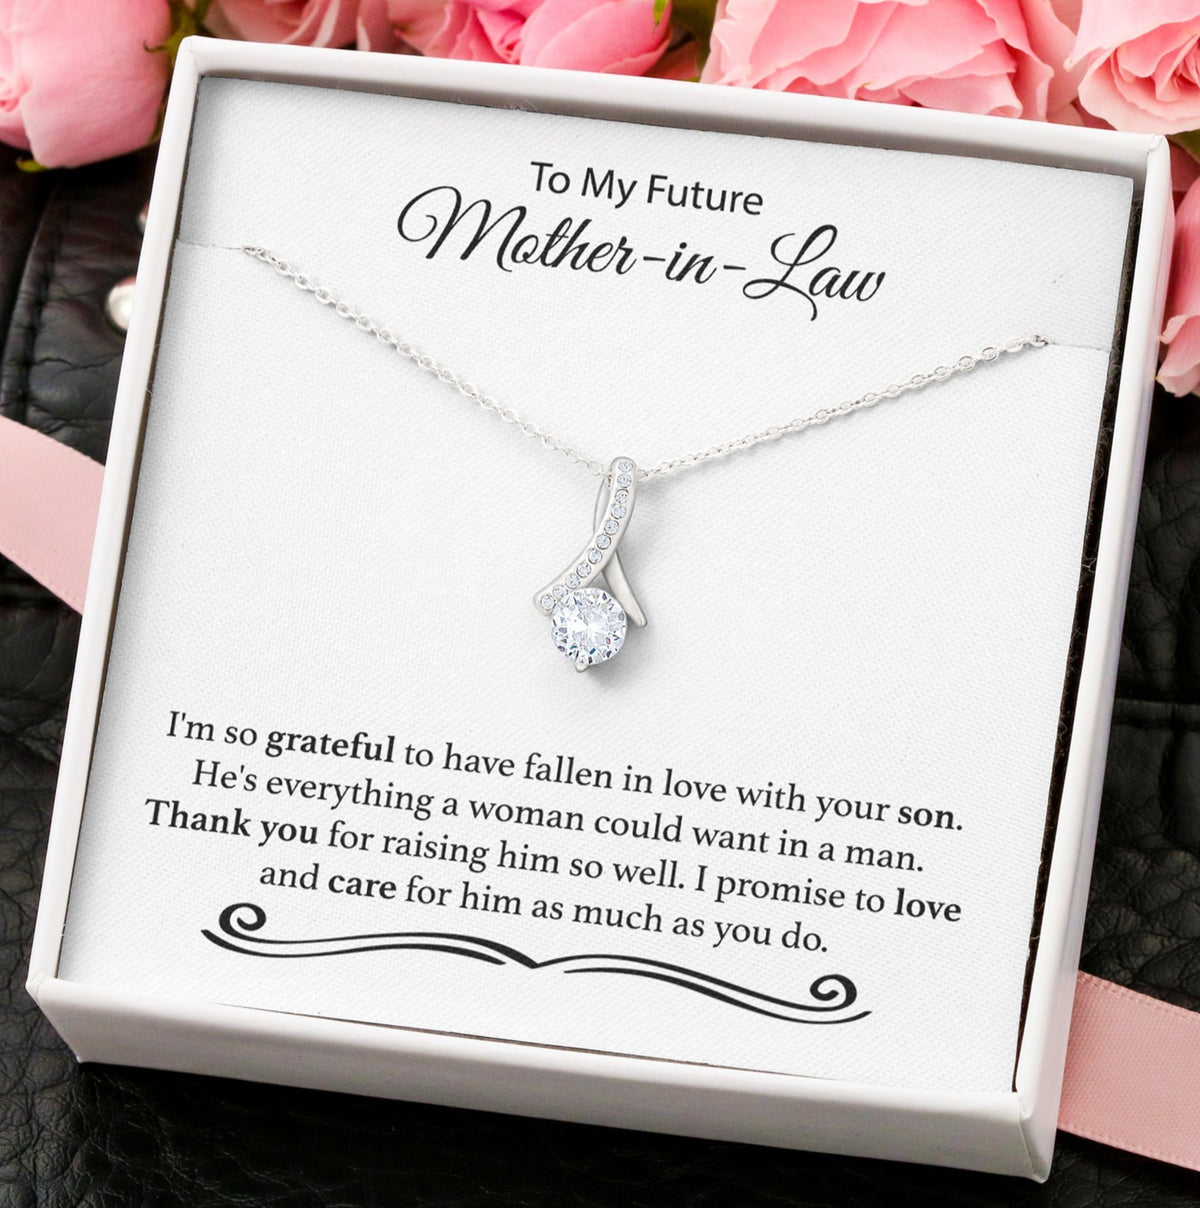 To My Future Mother-in-Law - Alluring Beauty Necklace - Thank You